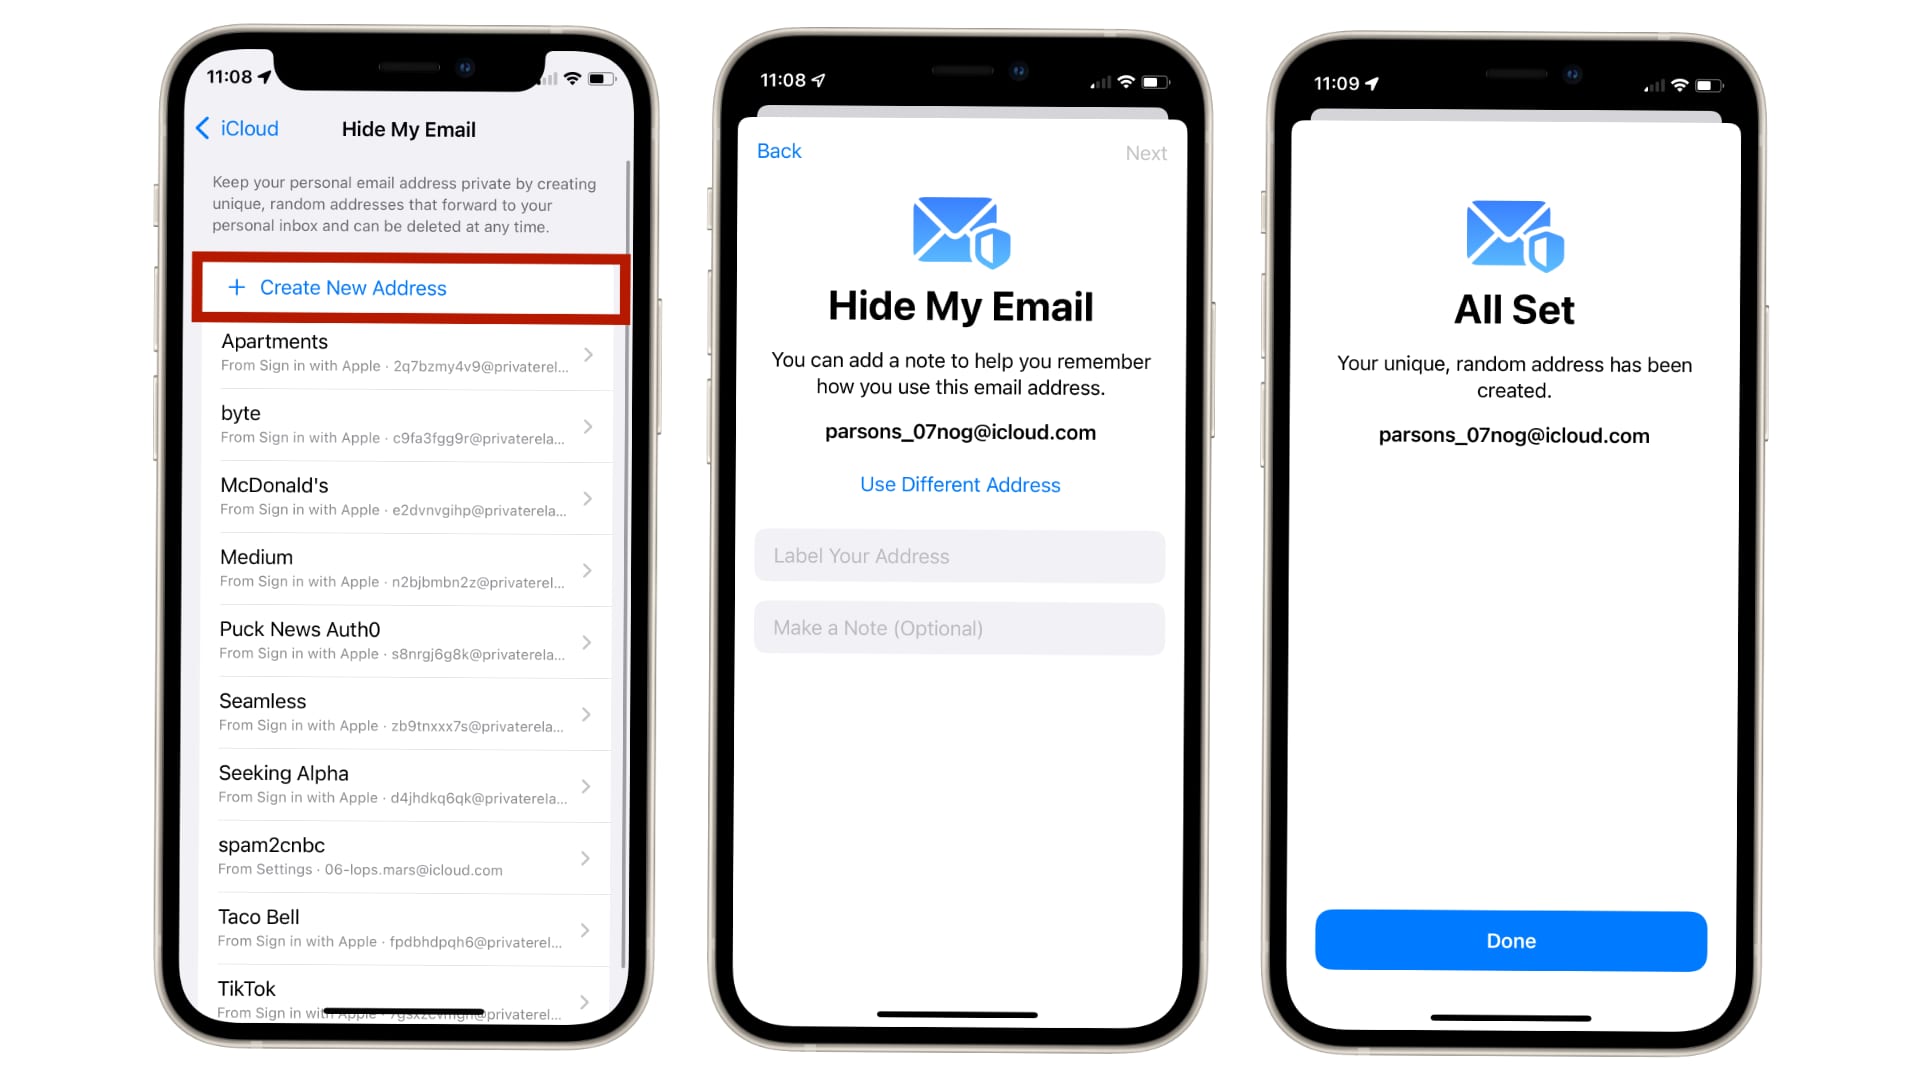 Feature "Hyde my email" Enables users to create a new temporary email address